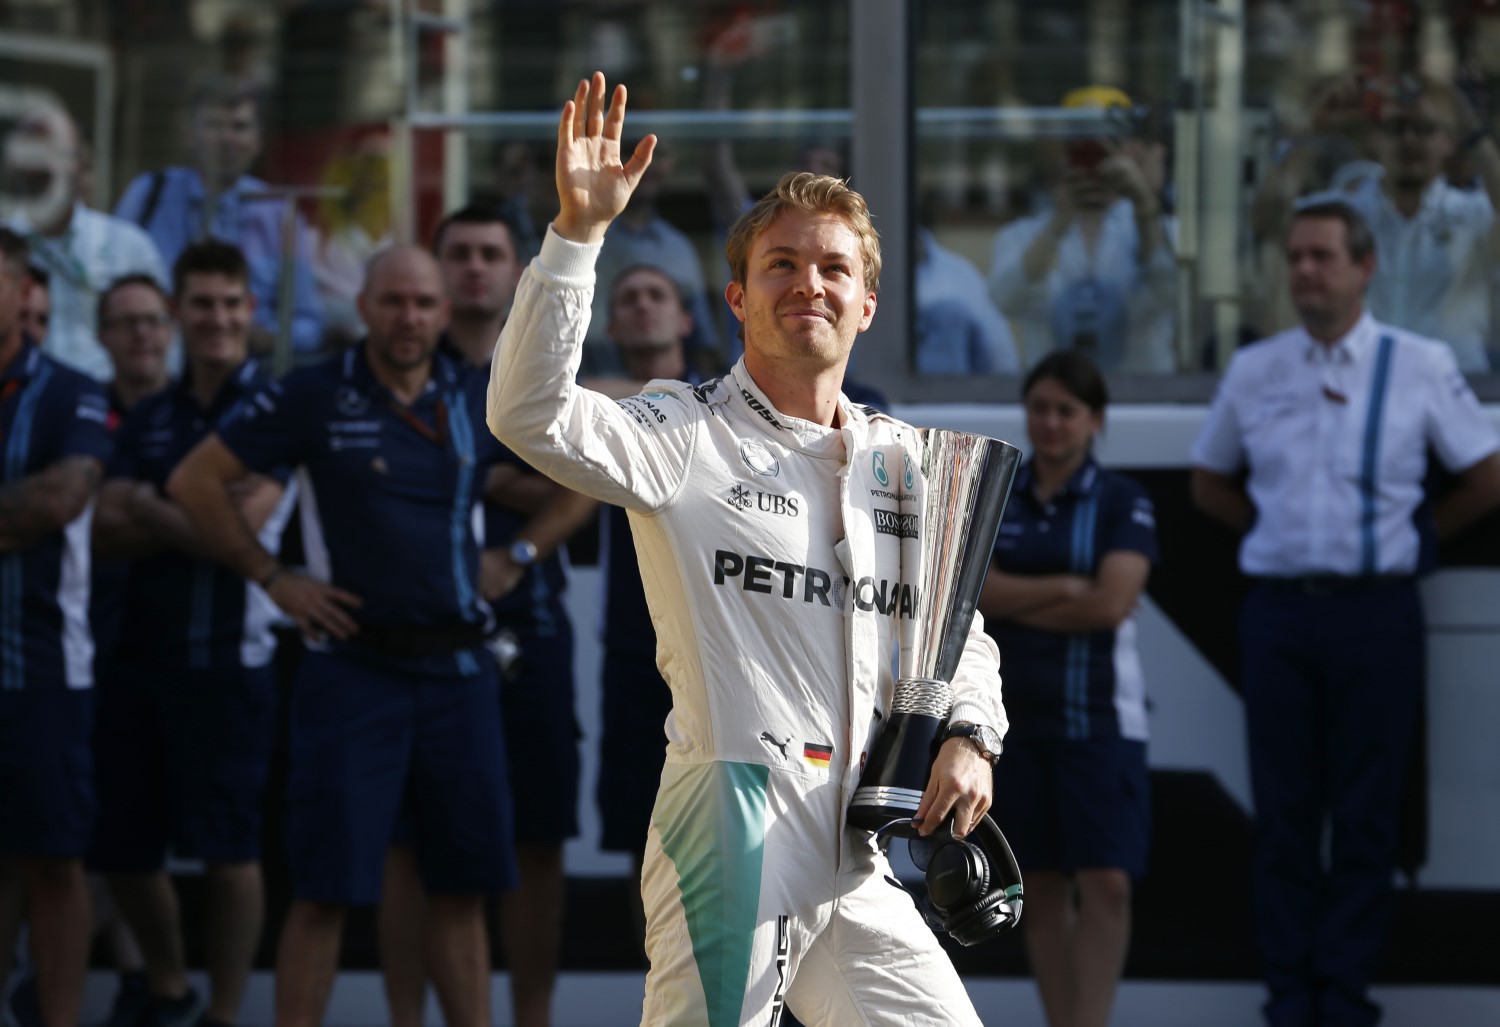 Rosberg takes the high road